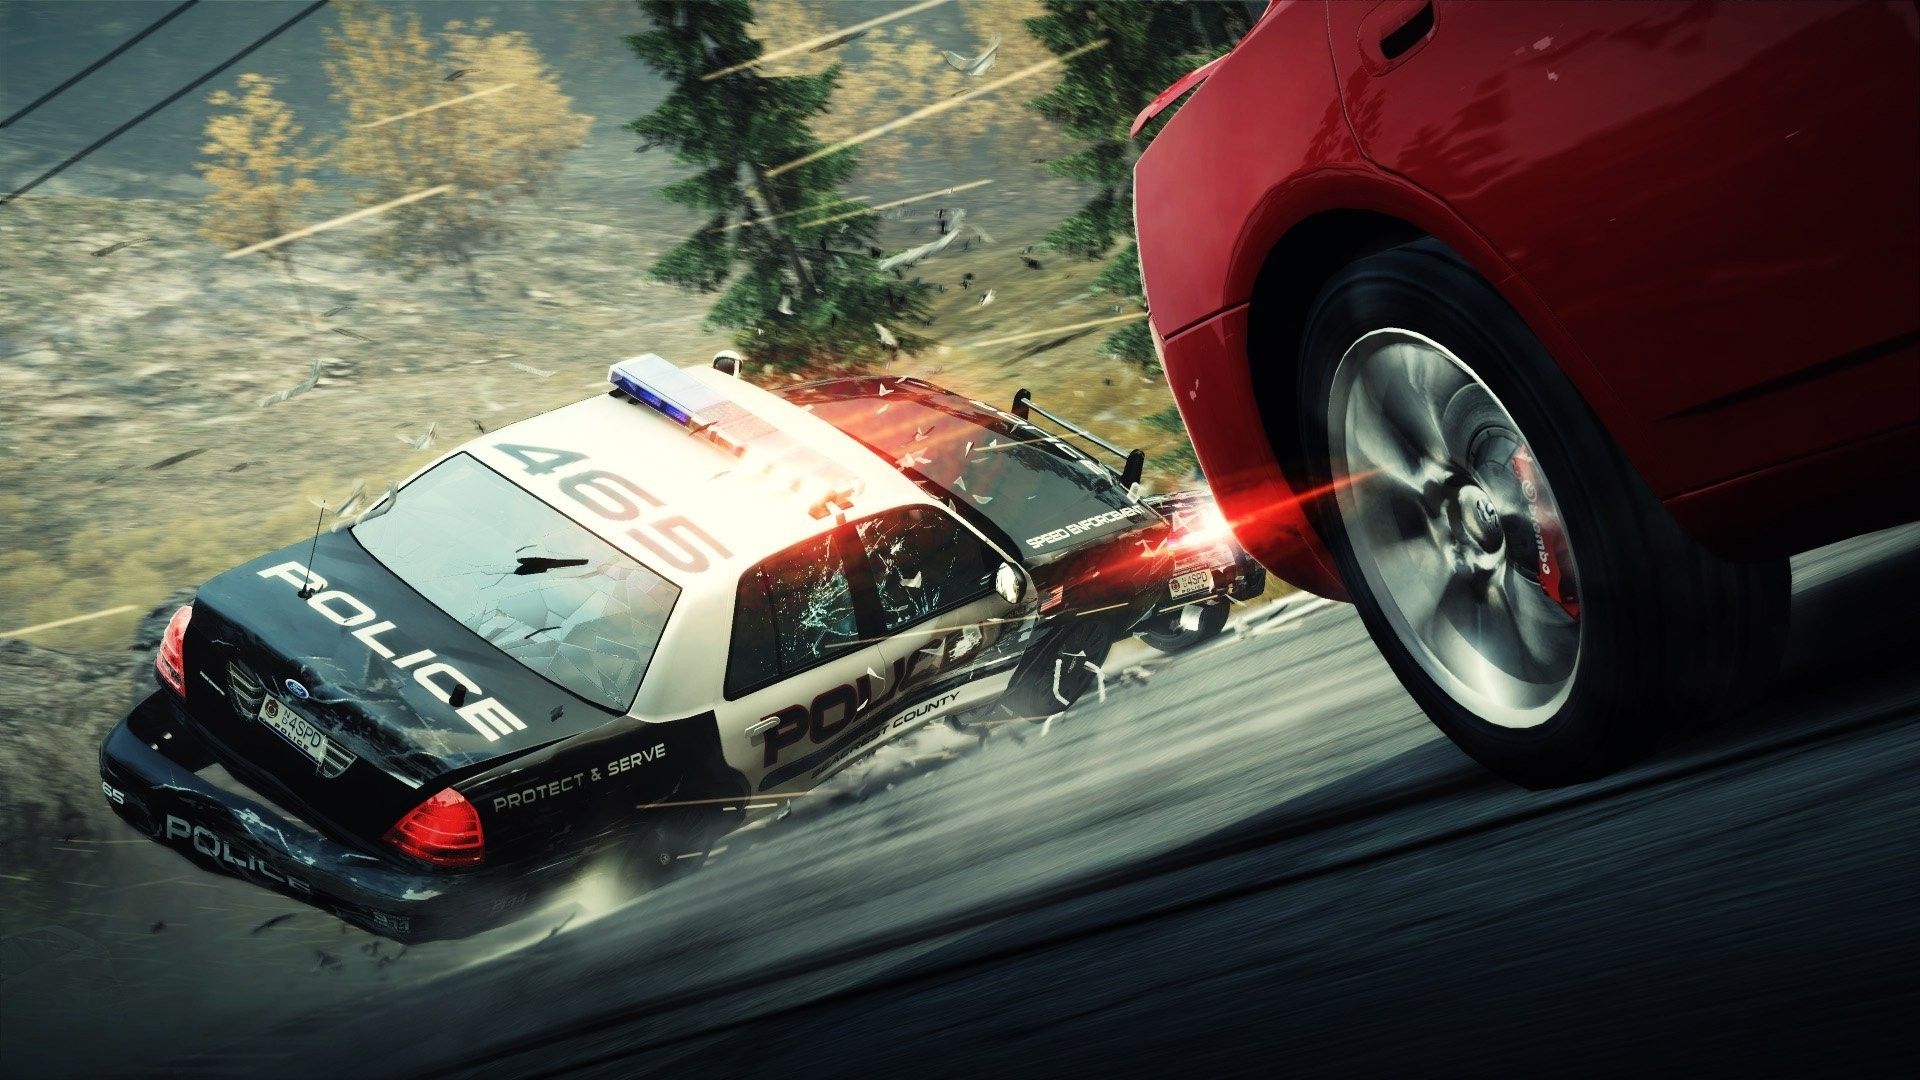 car, Video Games, Need For Speed: Hot Pursuit, Police Cars